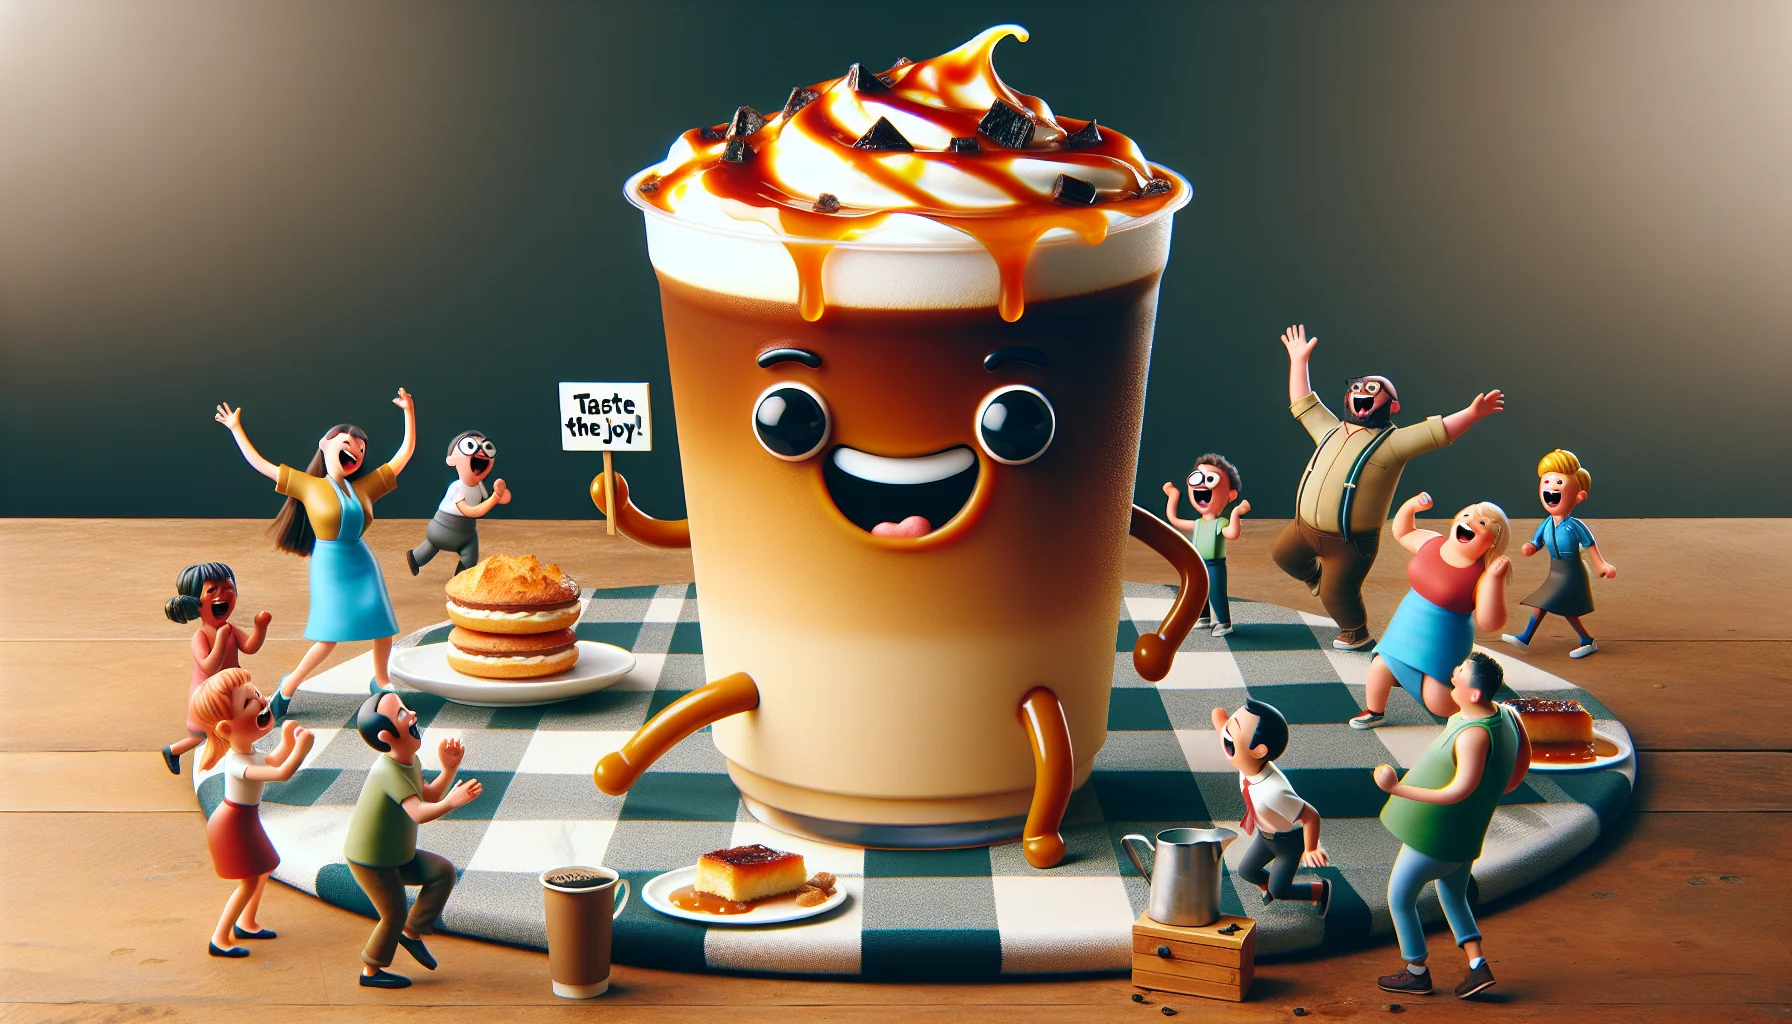 Create a comical and enticing image that depicts a iced caramel brûlée latte in a unique scenario. The latte, with its appealing layers of bold espresso, milk, rich caramel, and a smoky-sweet layer of brûlée topping should be the focal point of the image. The latte can be anthropomorphized, complete with cartoonish eyes and a wide grin. Imagine it wearing a small bow tie, tap-dancing on a checkered table cloth next to a plate of pastries. It's waving a small sign that says 'Taste the Joy!'. Surrounding the table, there are people from various descents and genders literally being swept off their feet due to their growing desire to try the latte.